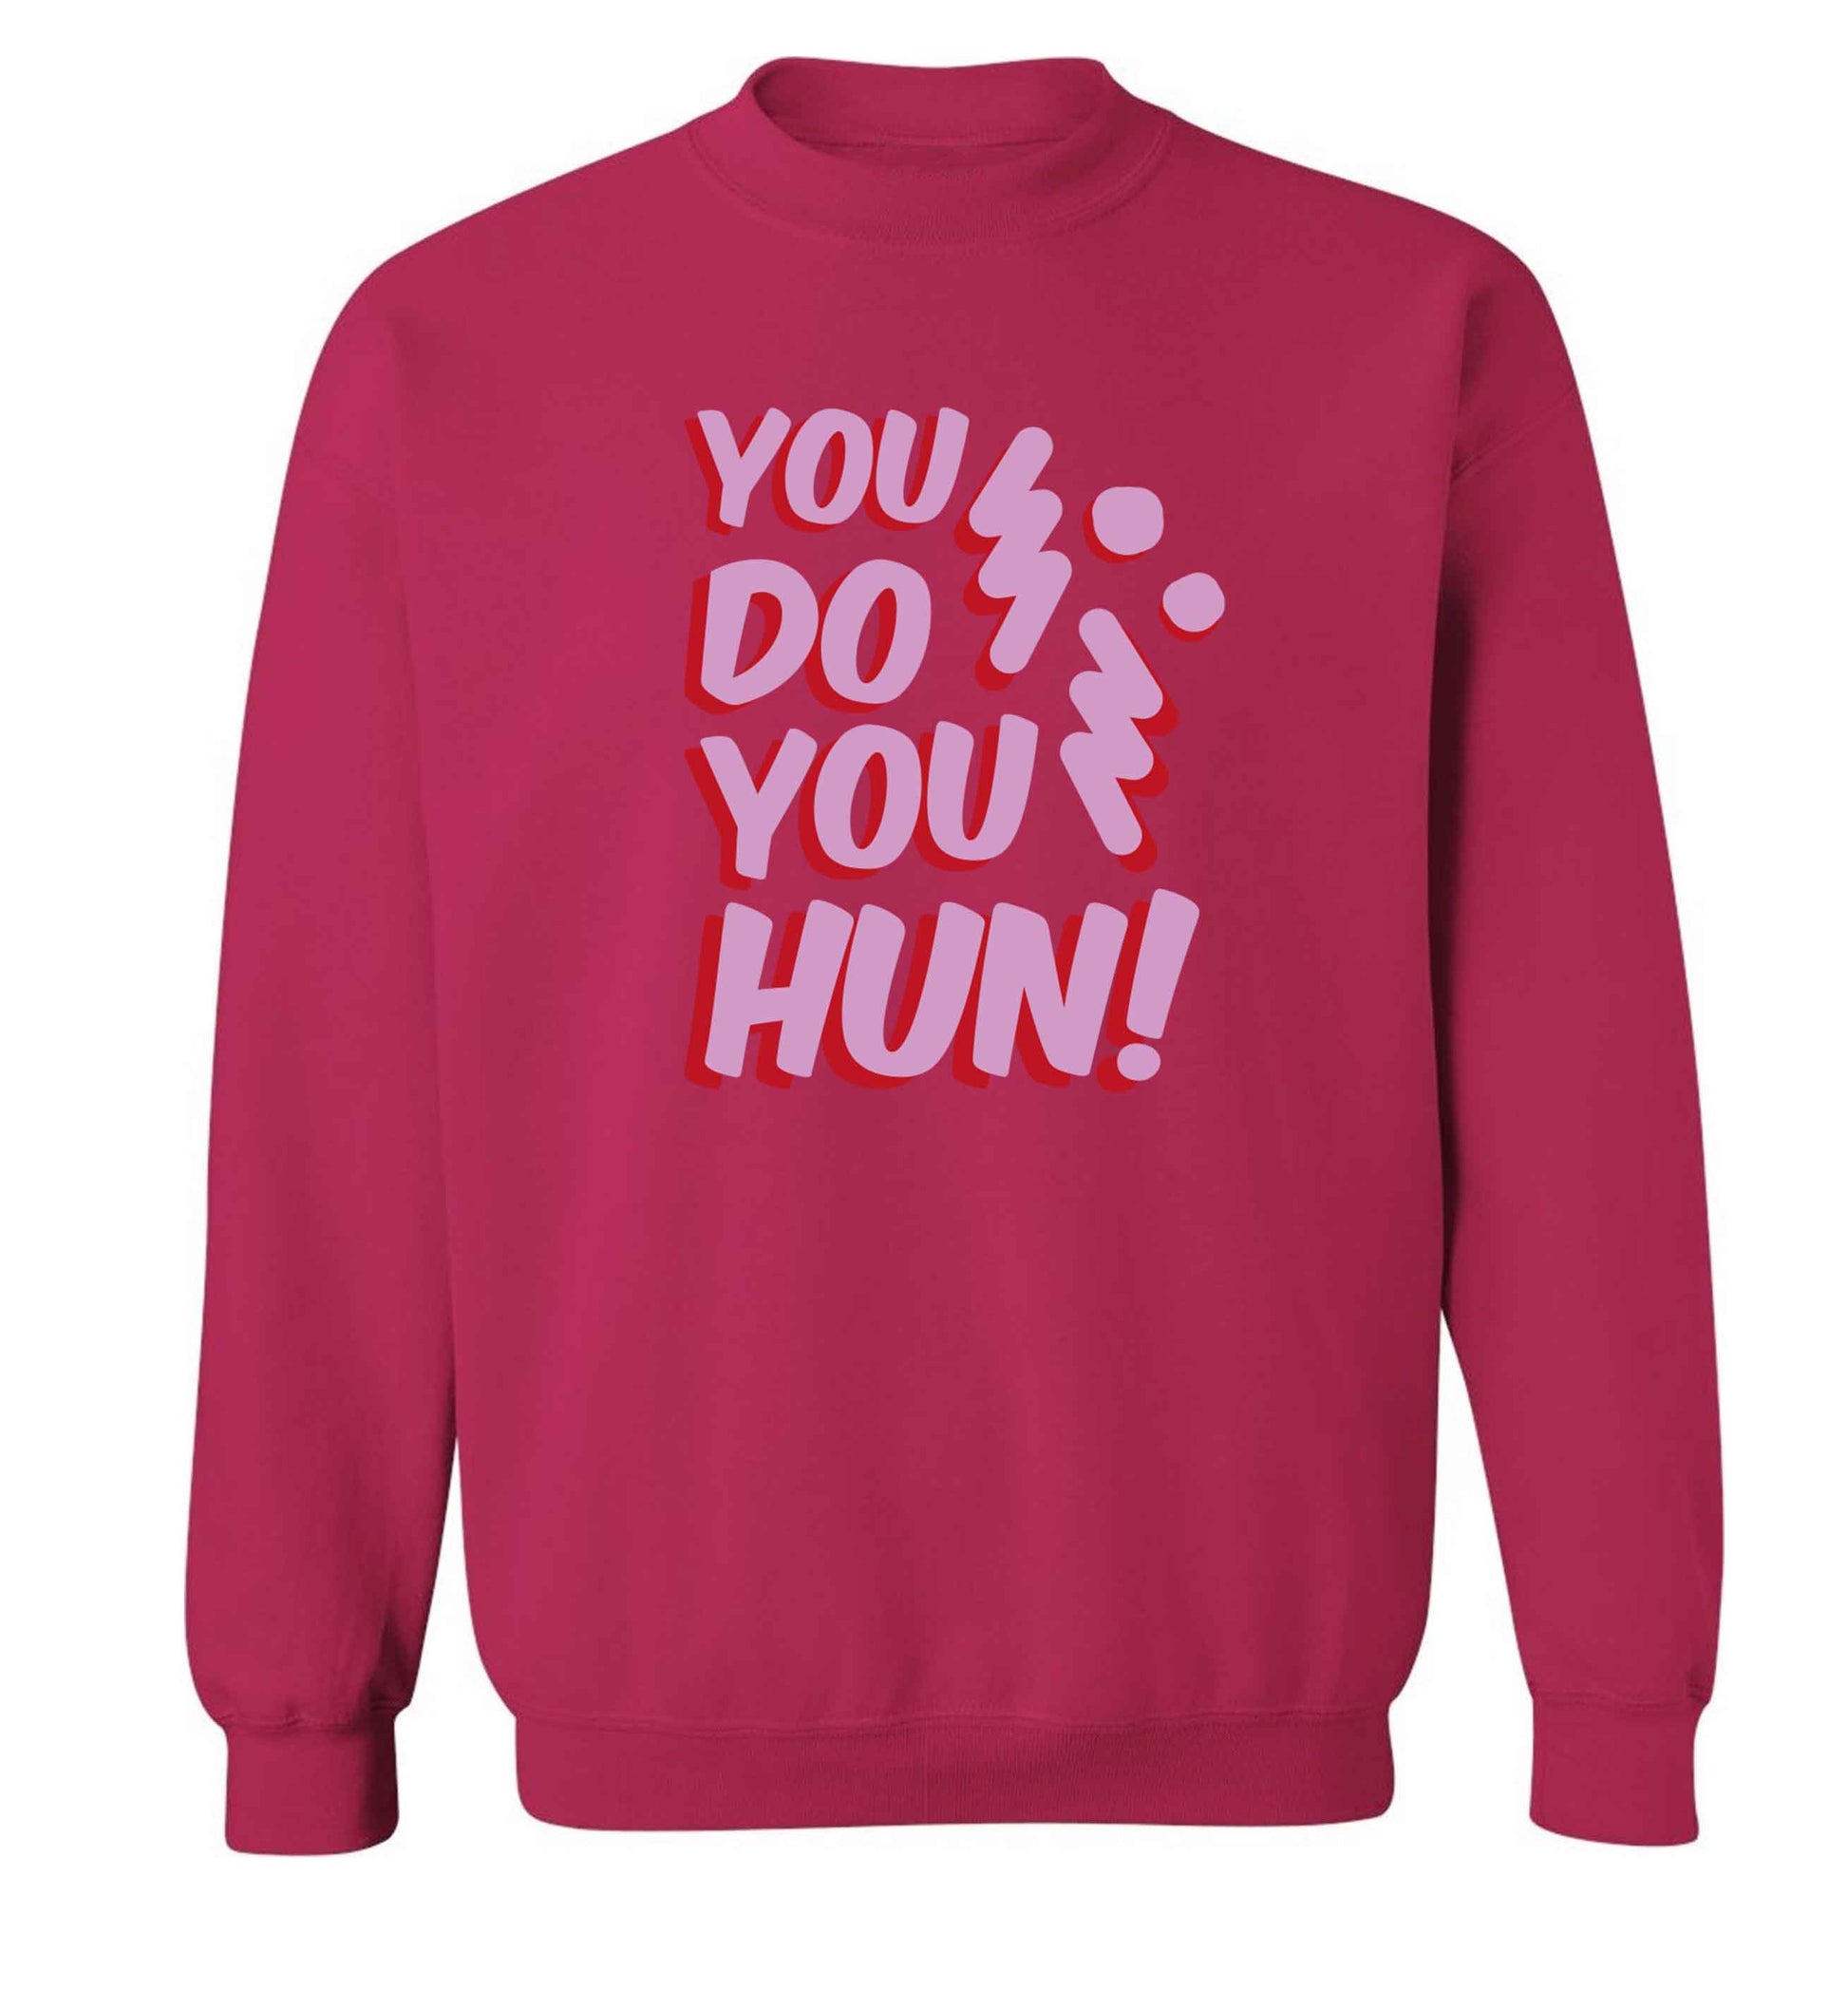 You do you hun adult's unisex pink sweater 2XL